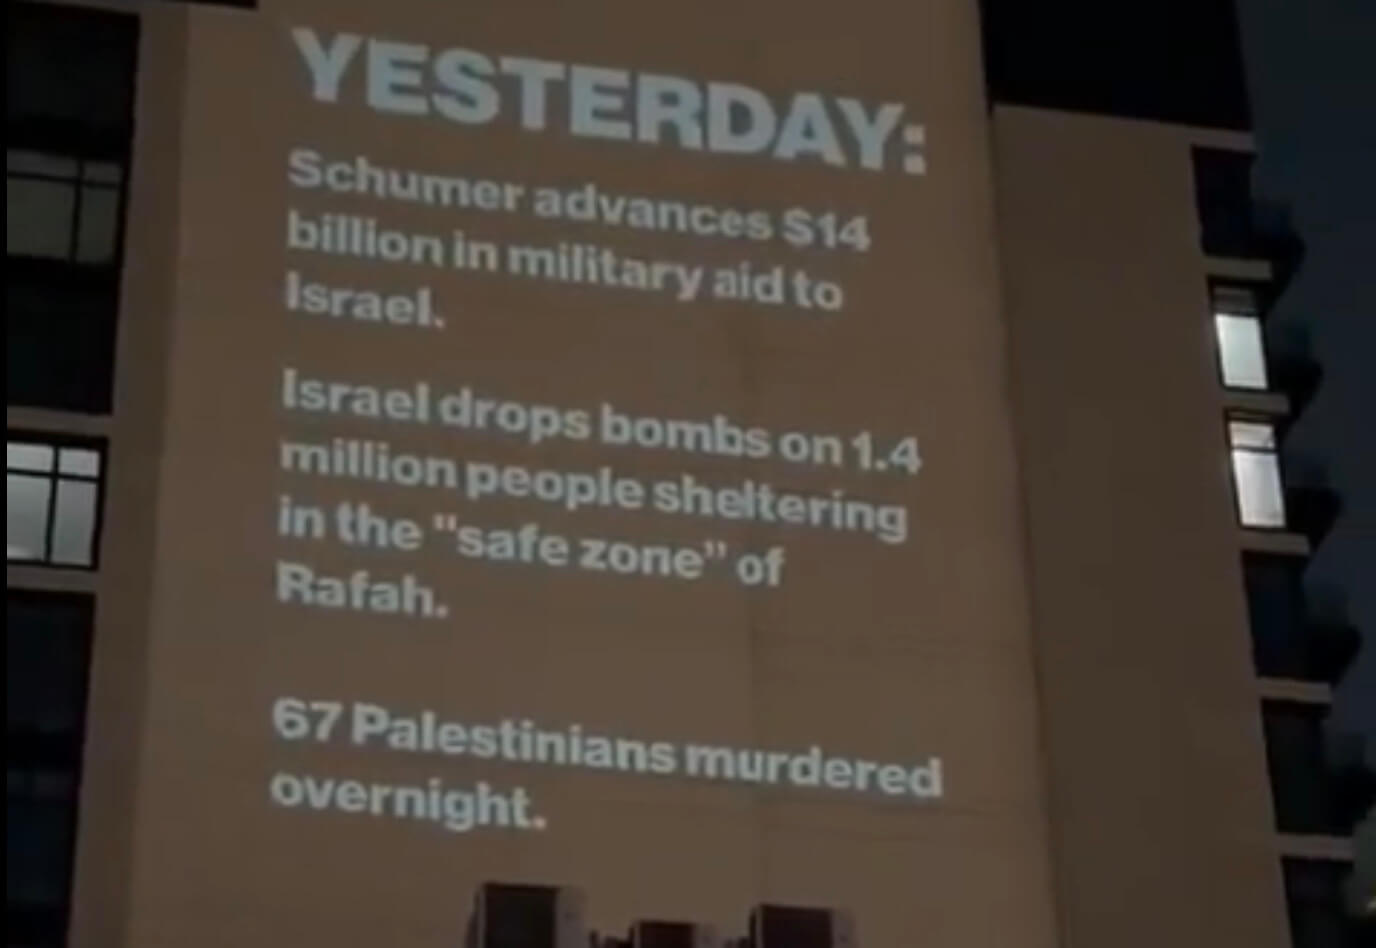 IfNotNow projected this message on a building near the Midtown office of Sen. Chuck Schumer on Feb. 12 to protest Israeli military action in Rafah, a city in southern Gaza.